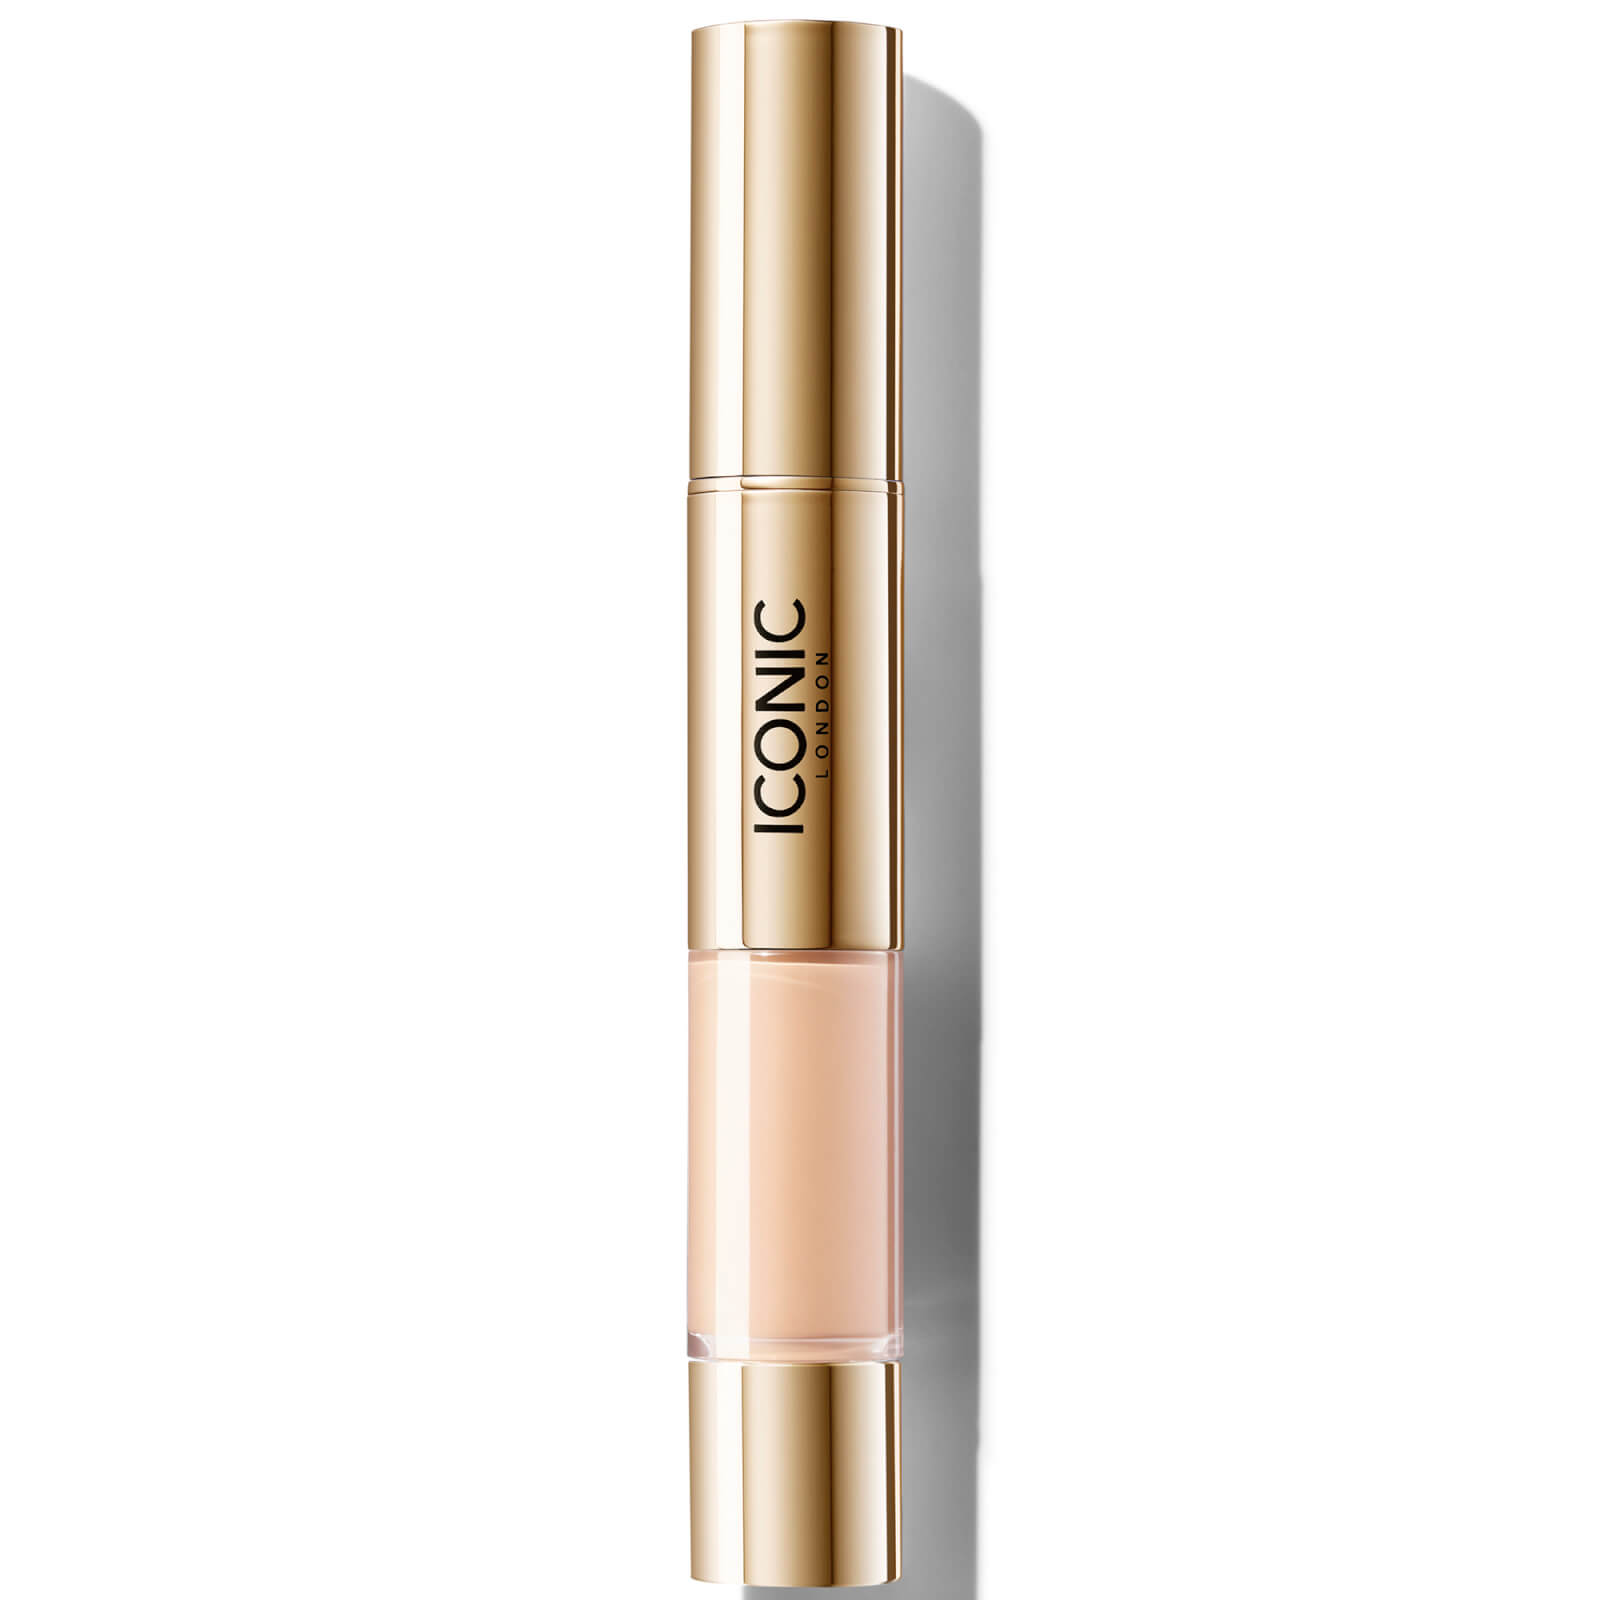 iconic london radiant concealer and brightening duo neutral fair